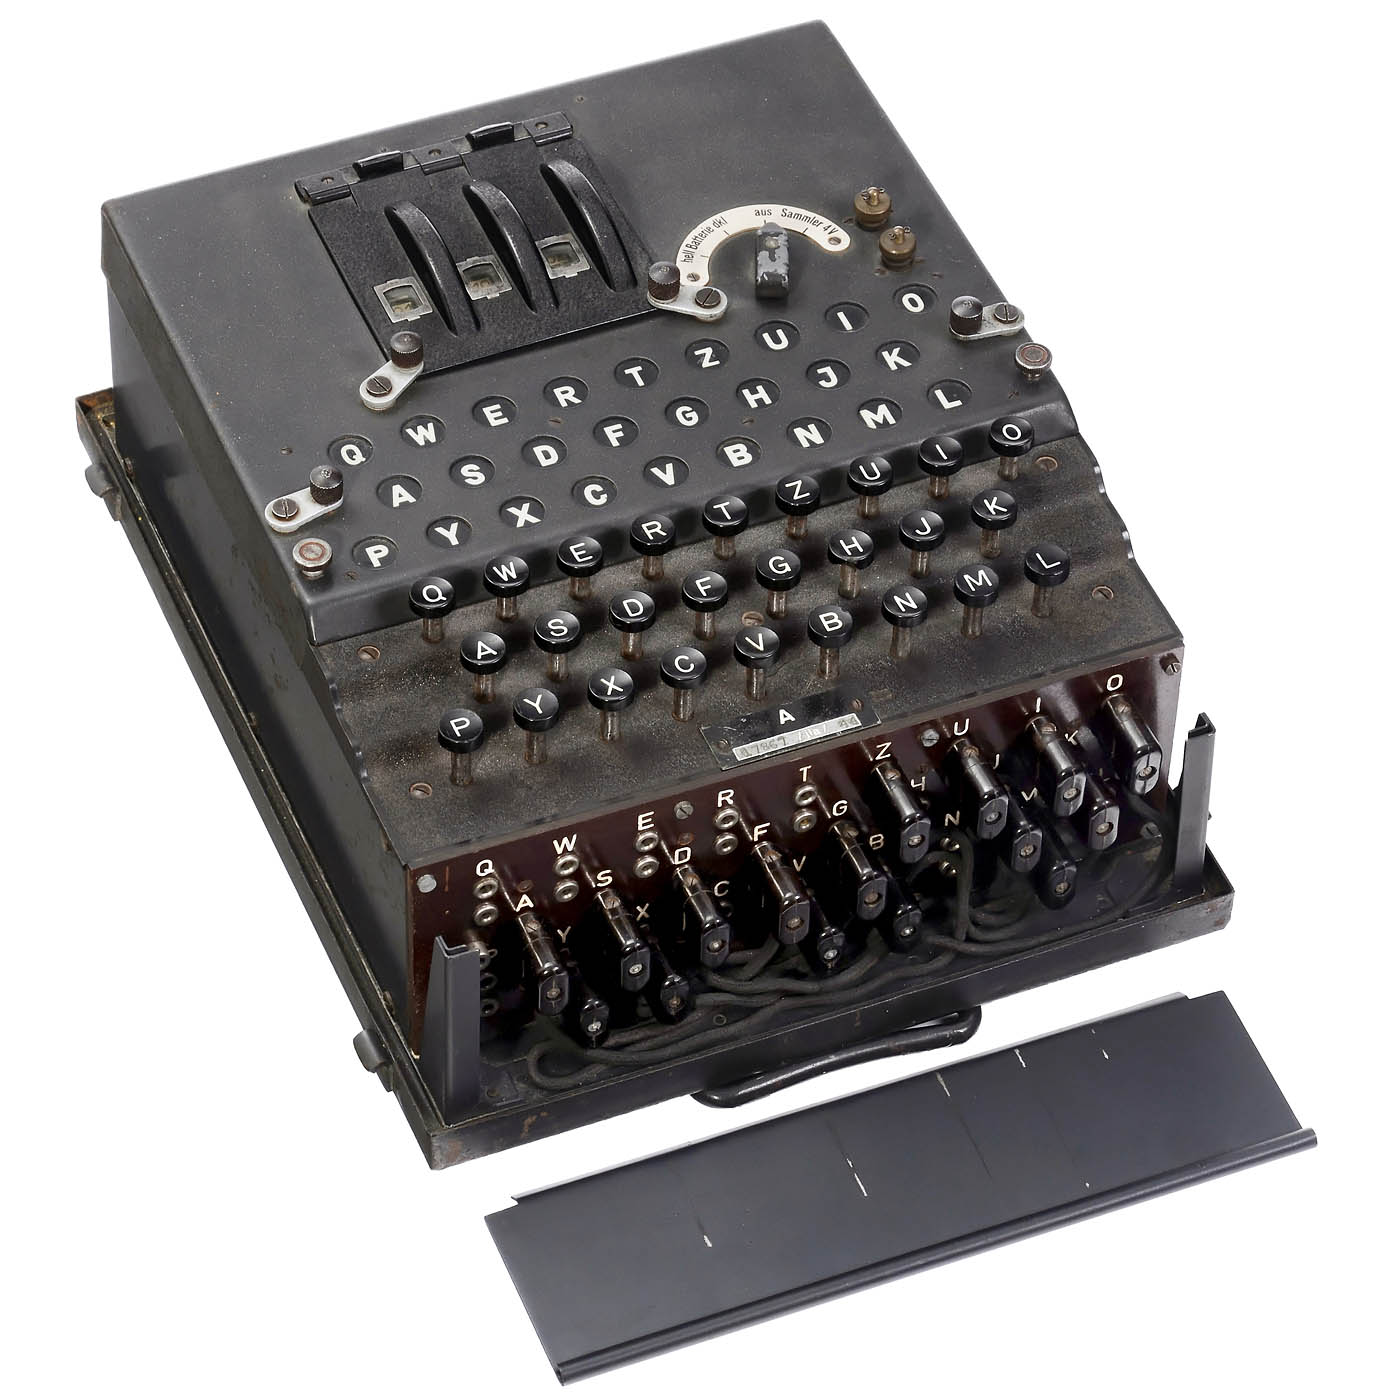 Legendary German "Enigma 1" Cyphering Machine with Special Switching, 1944 - Image 3 of 10